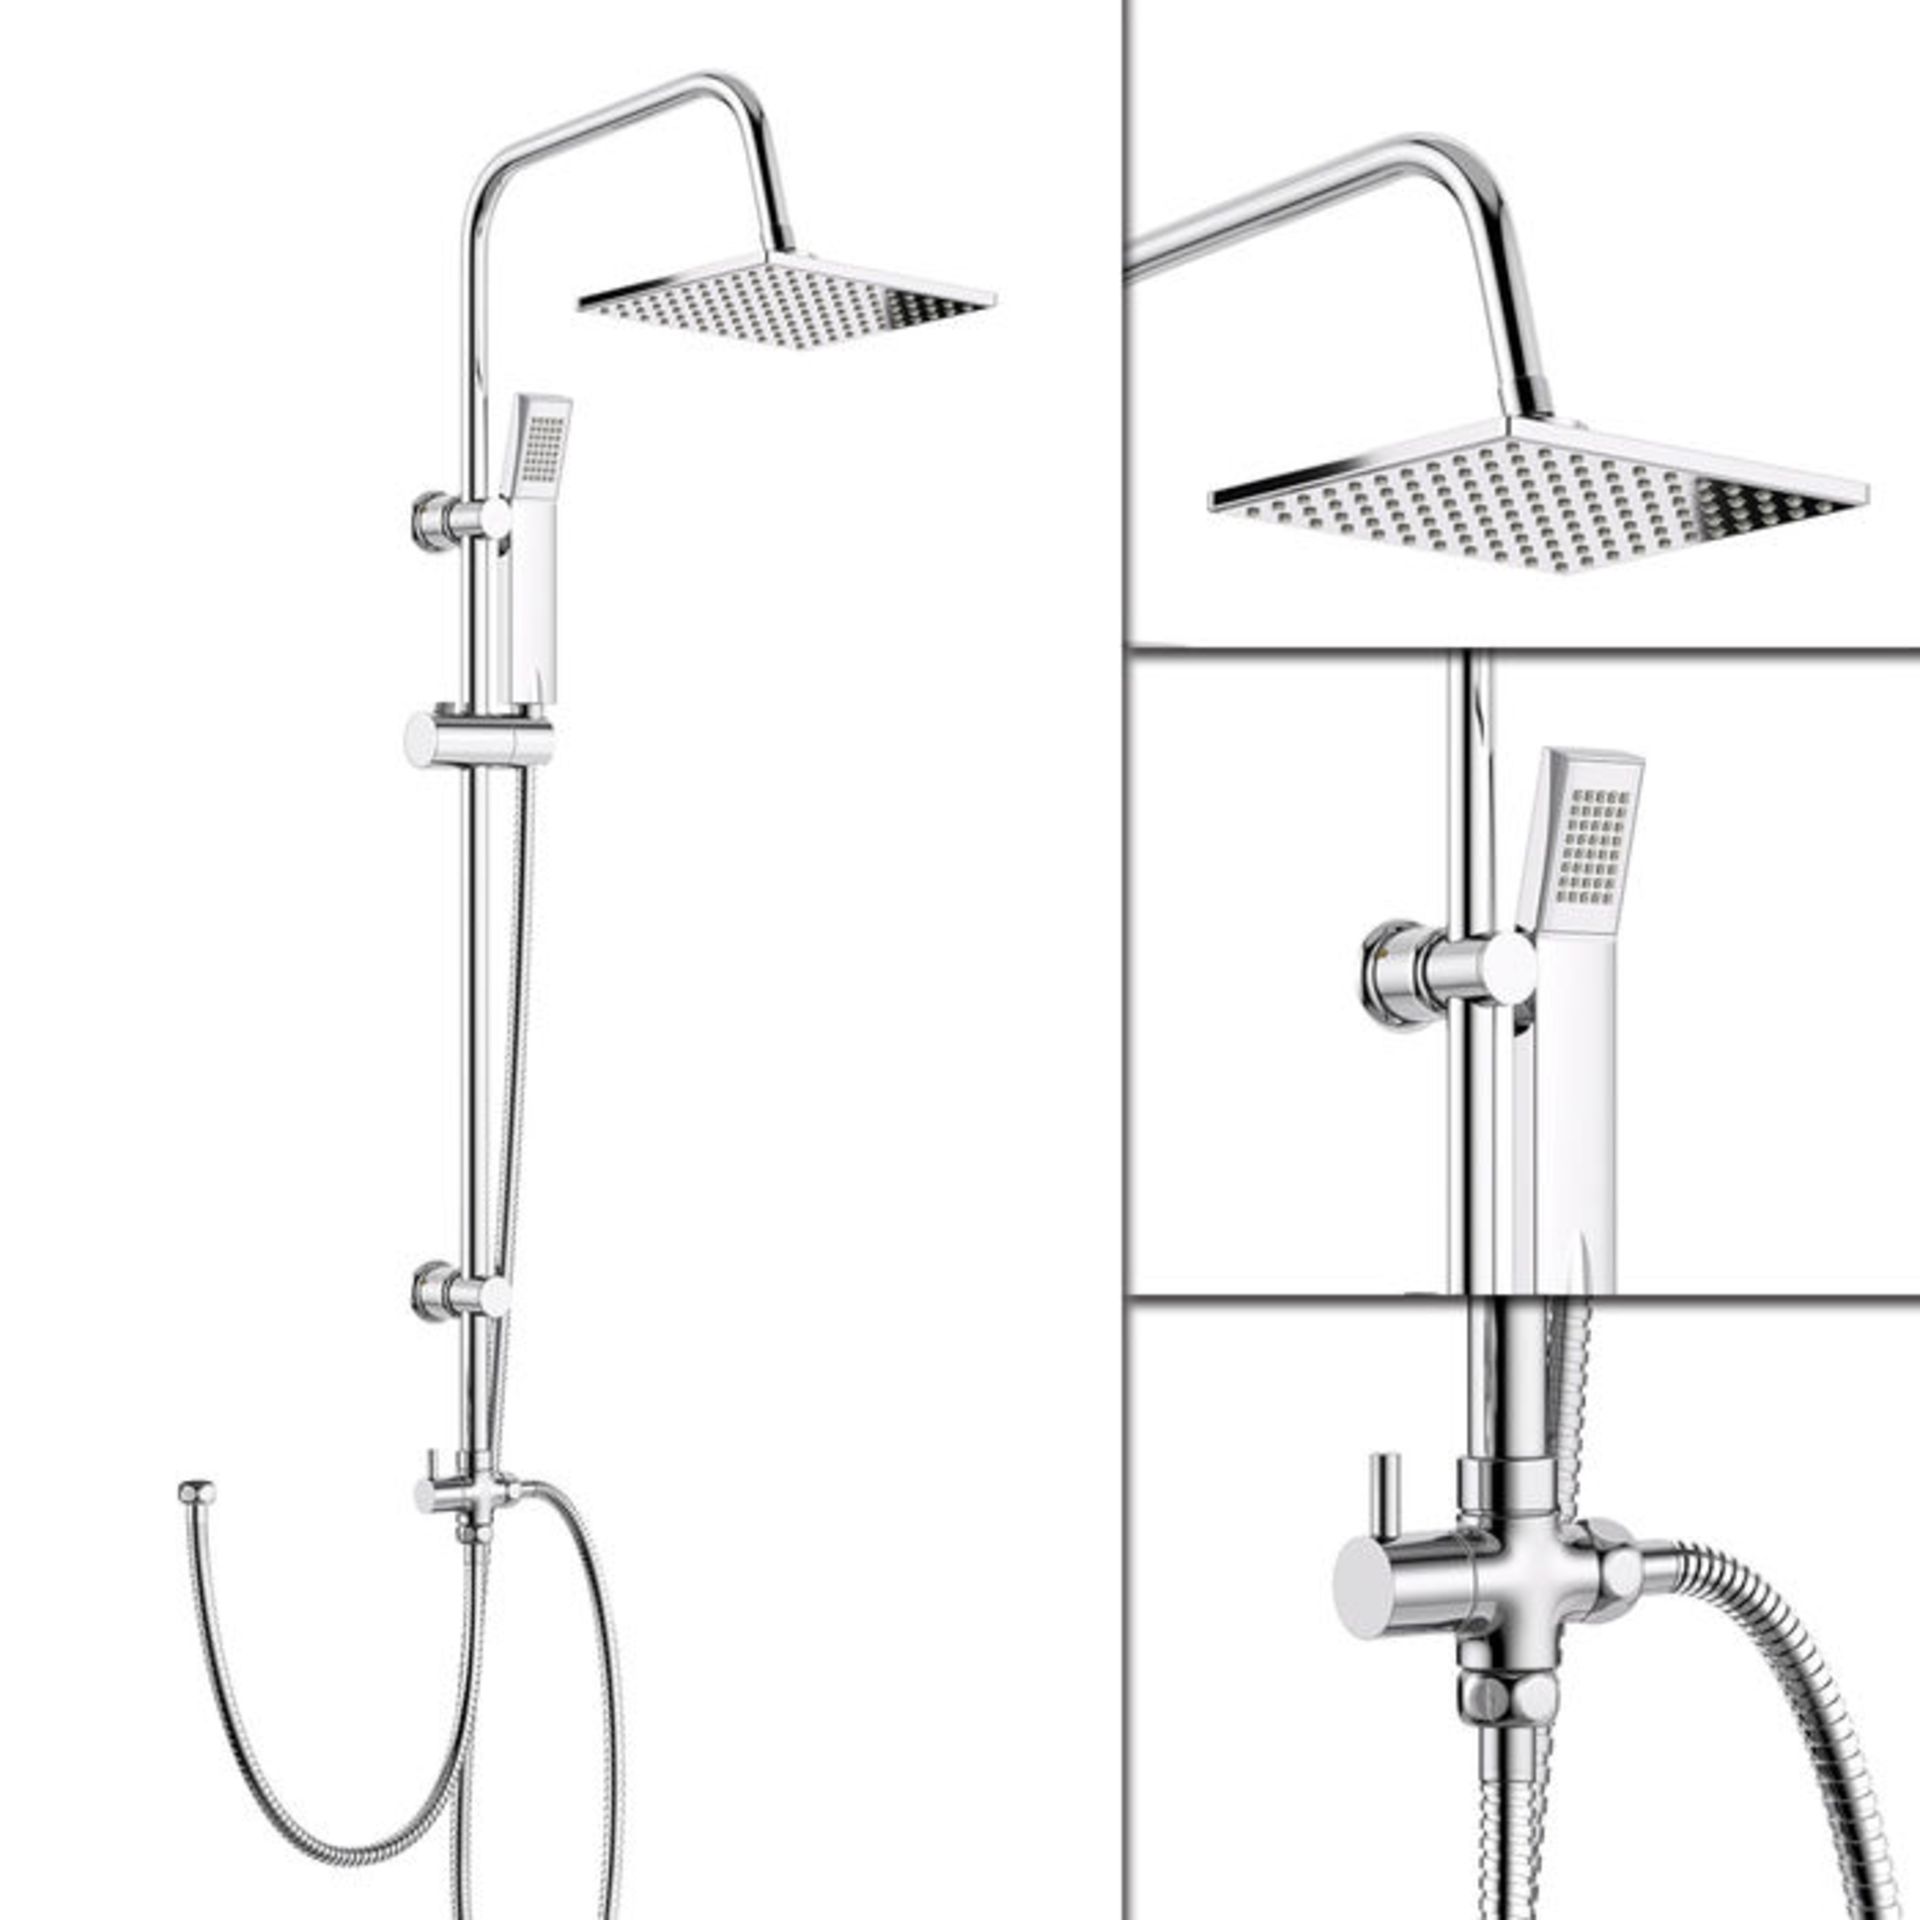 (P160) 200mm Square Head, Riser Rail & Handheld Kit. Quality stainless steel shower head with Easy - Image 3 of 4